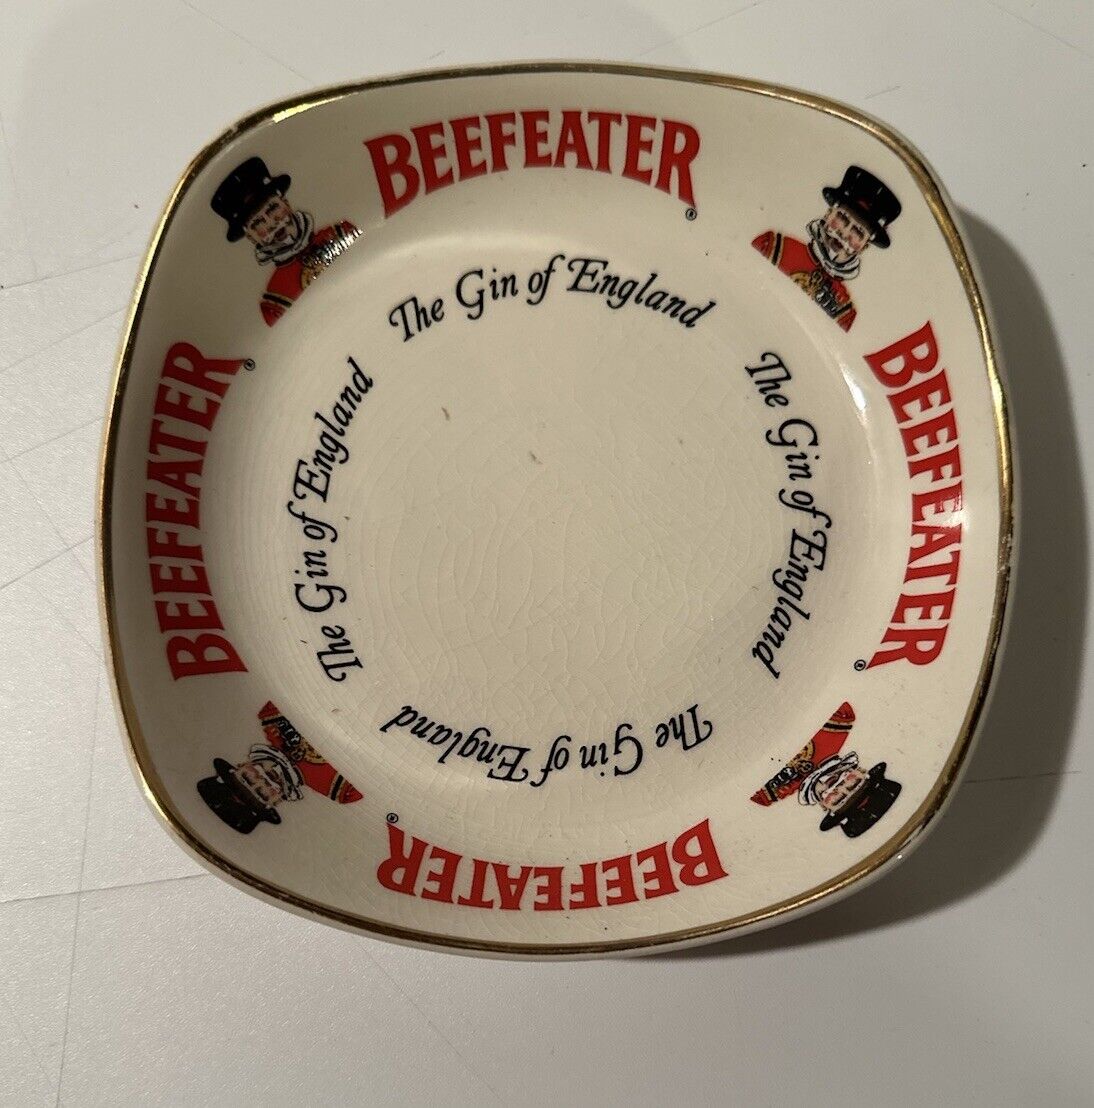 Vintage Beefeater London Gin Advertising Ashtray by Wade - Great shape and price